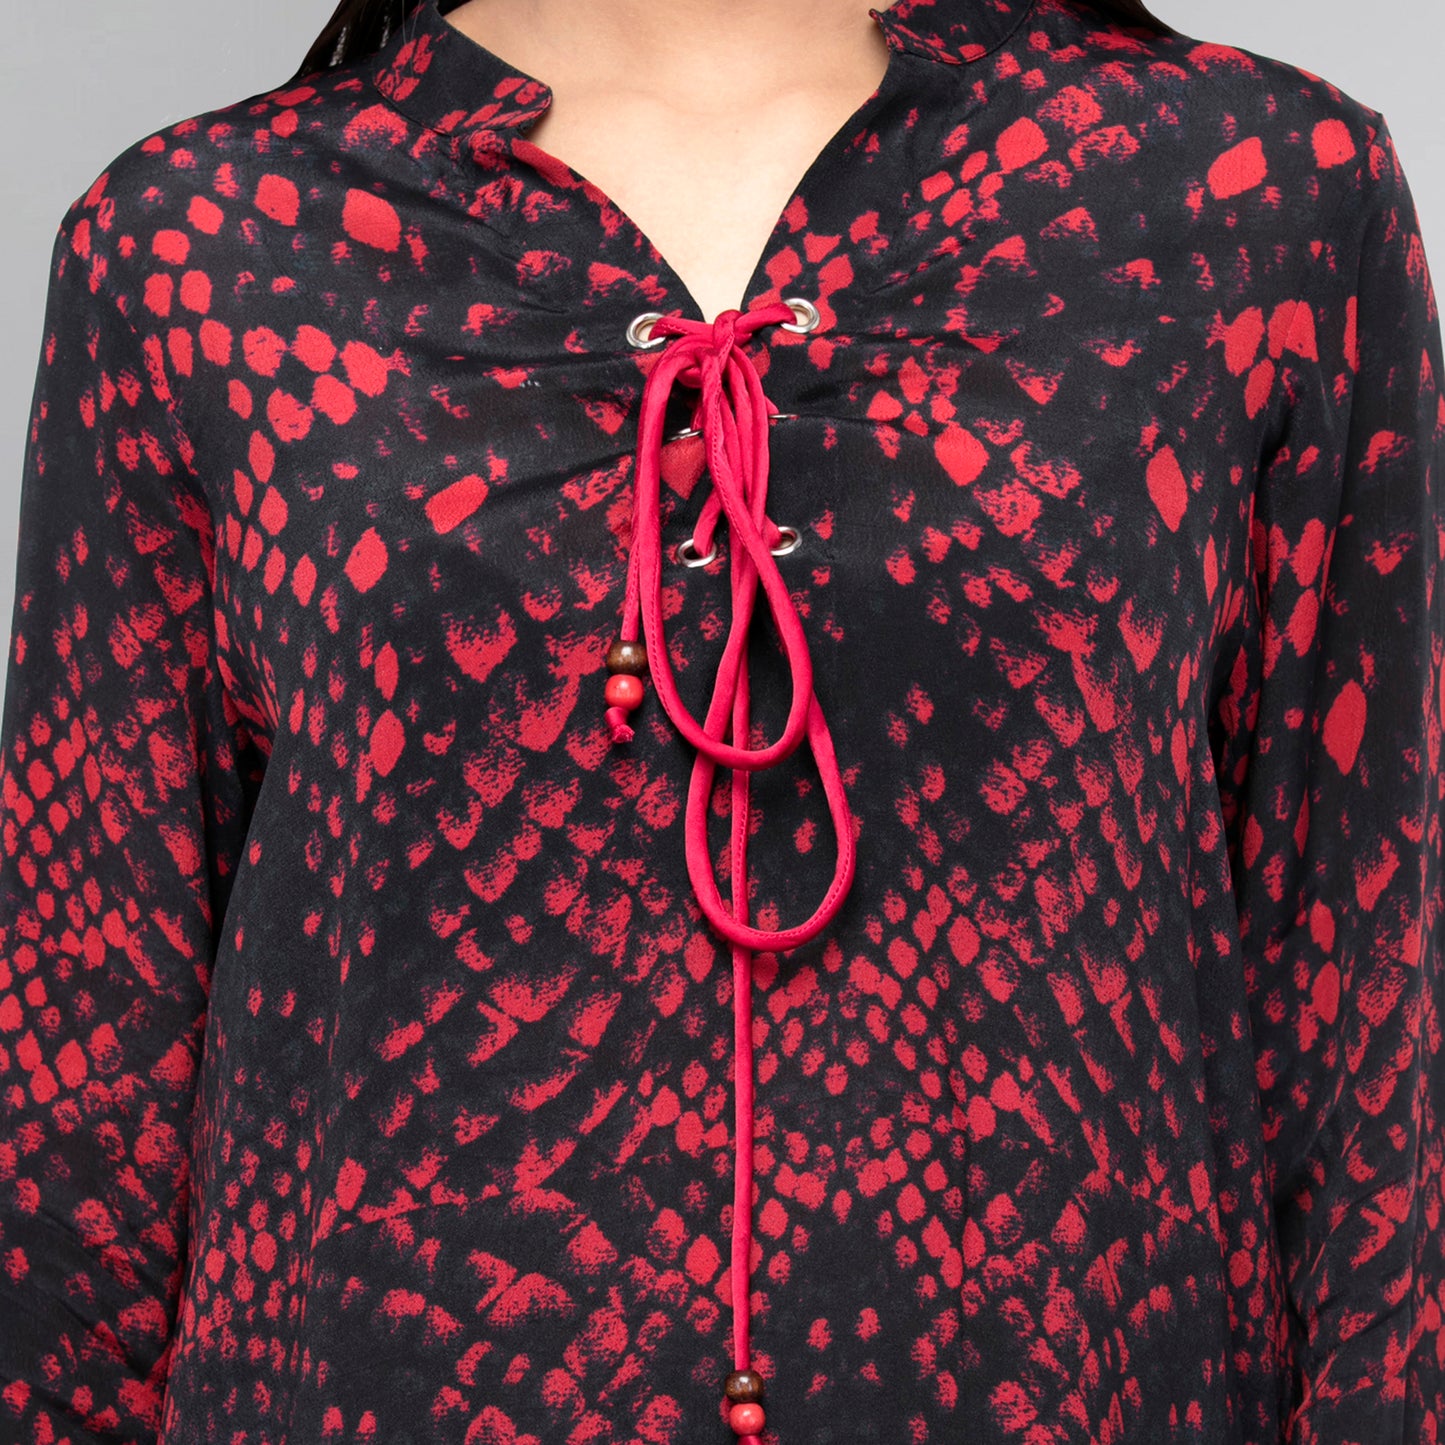 Dark Red Animal Print Lace-Up Top